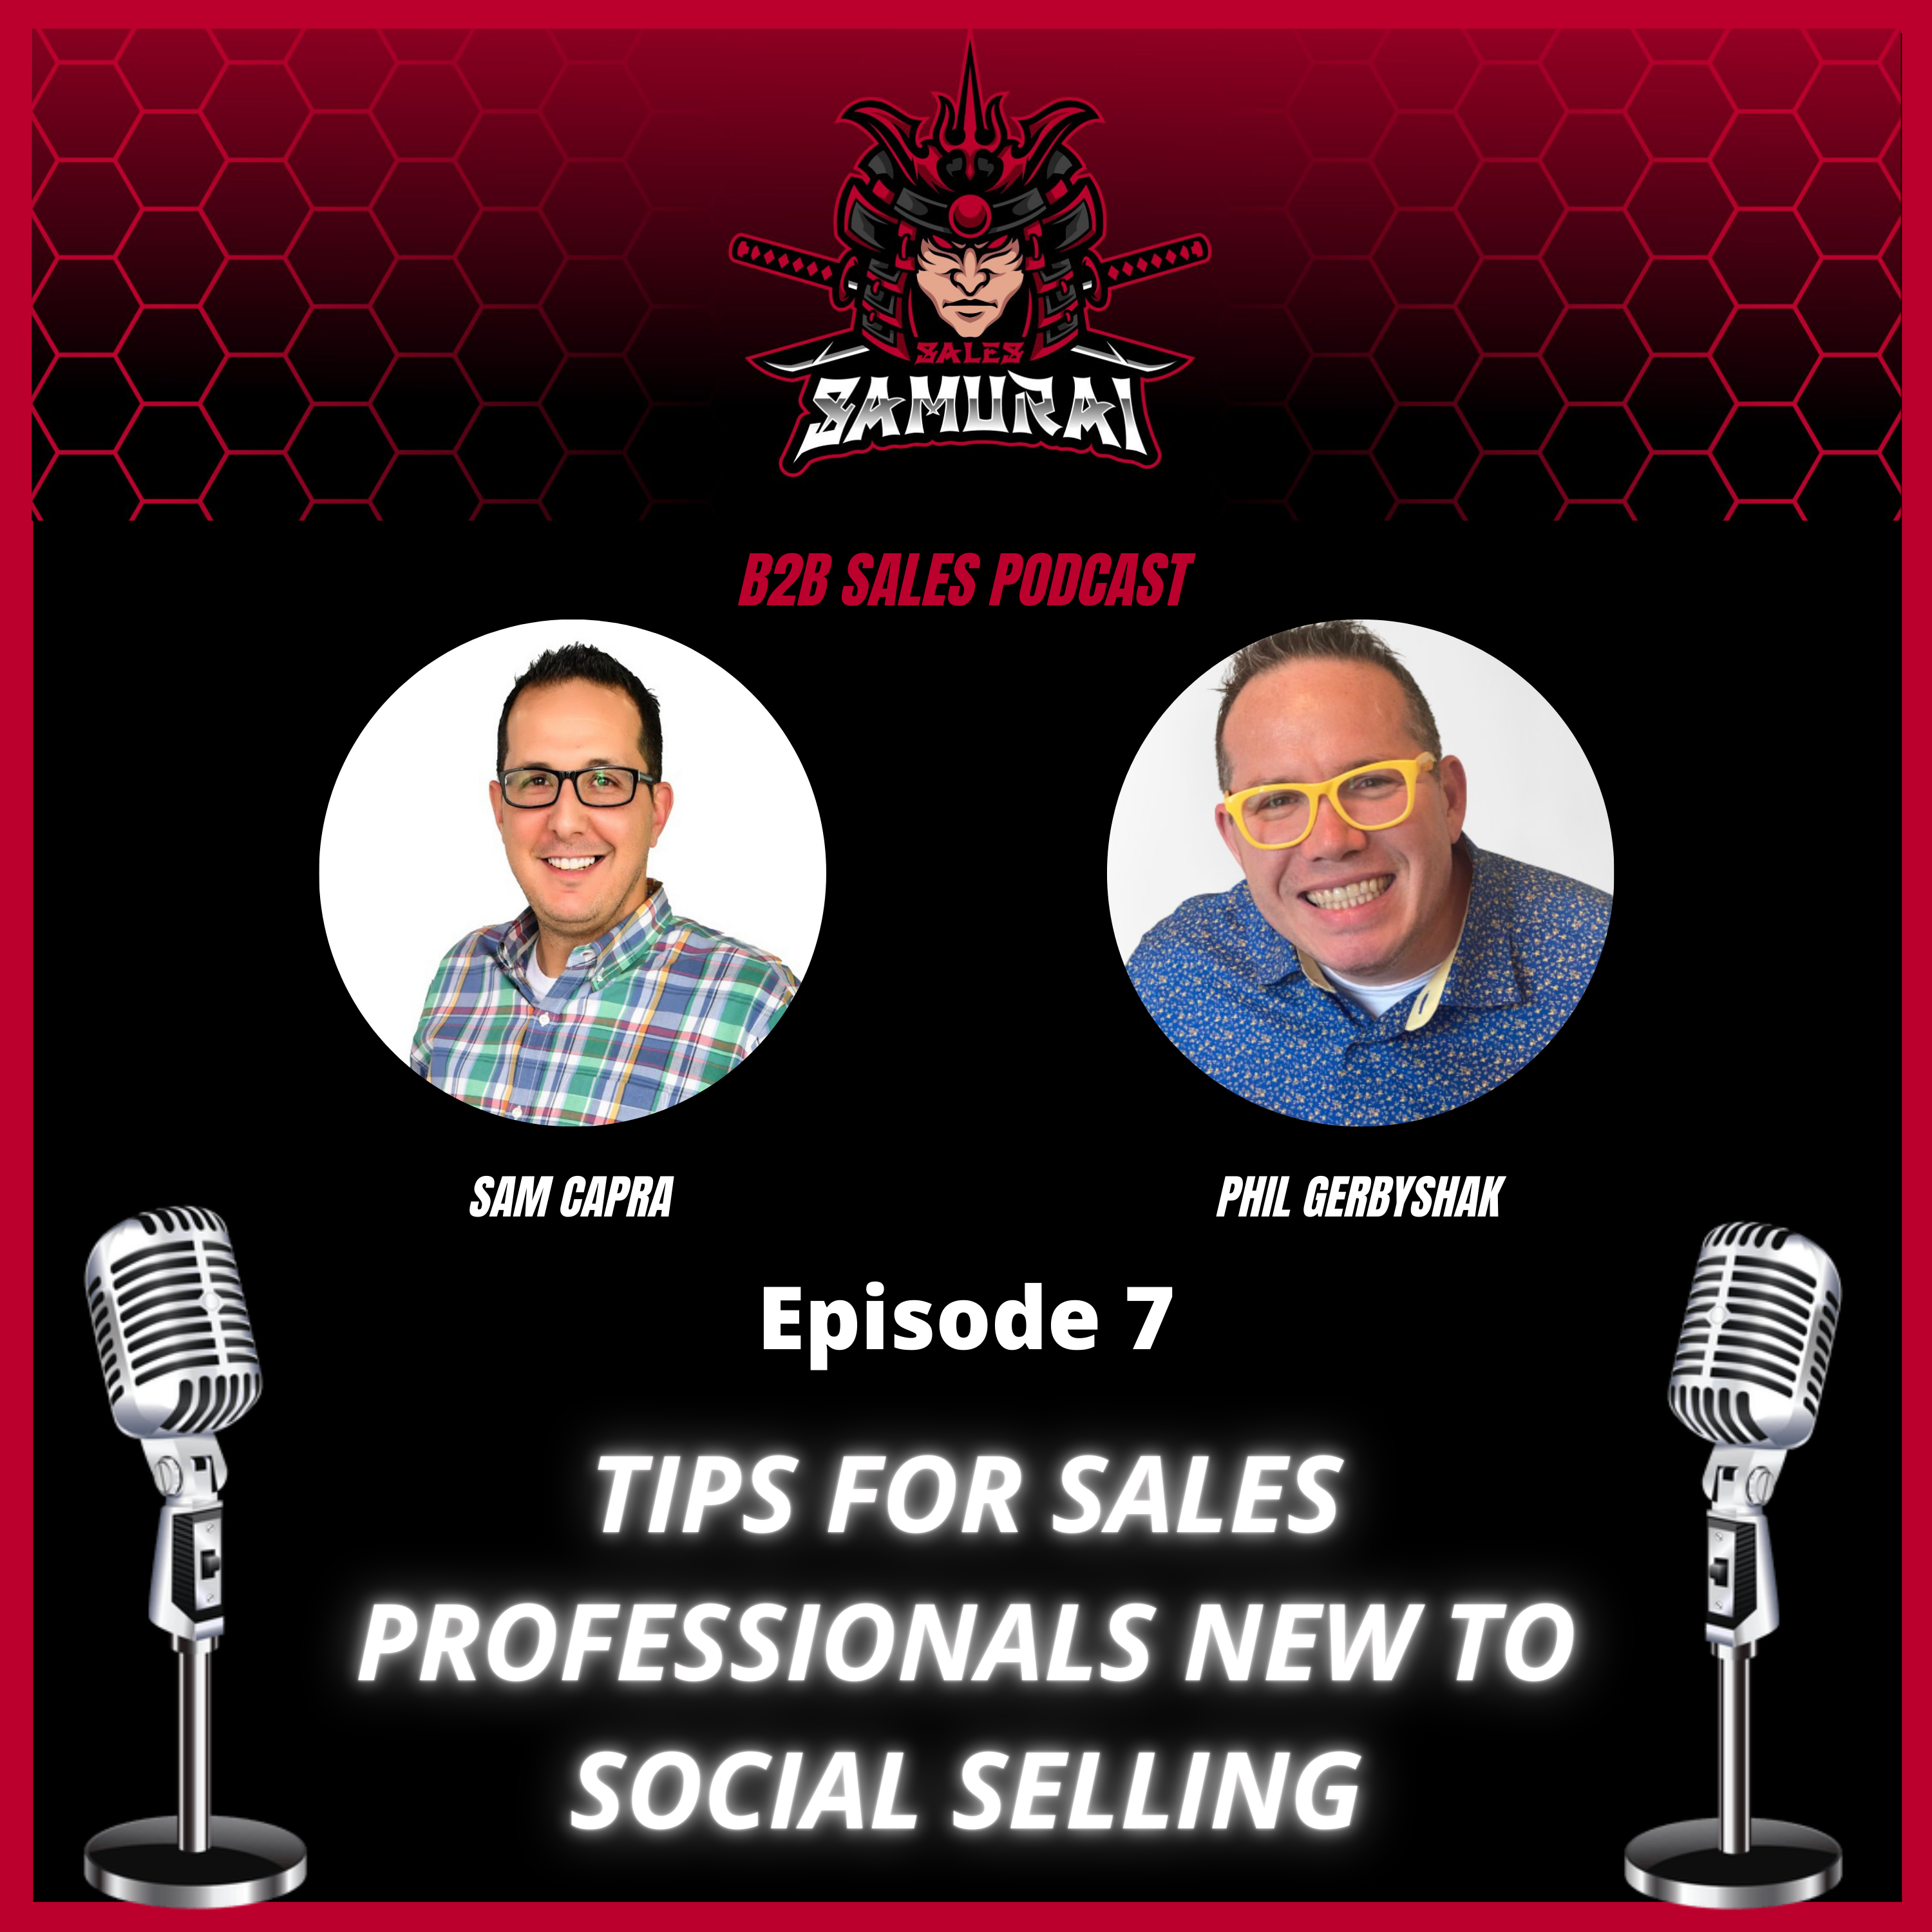 Tips for Sales Professionals New to Social Selling Image